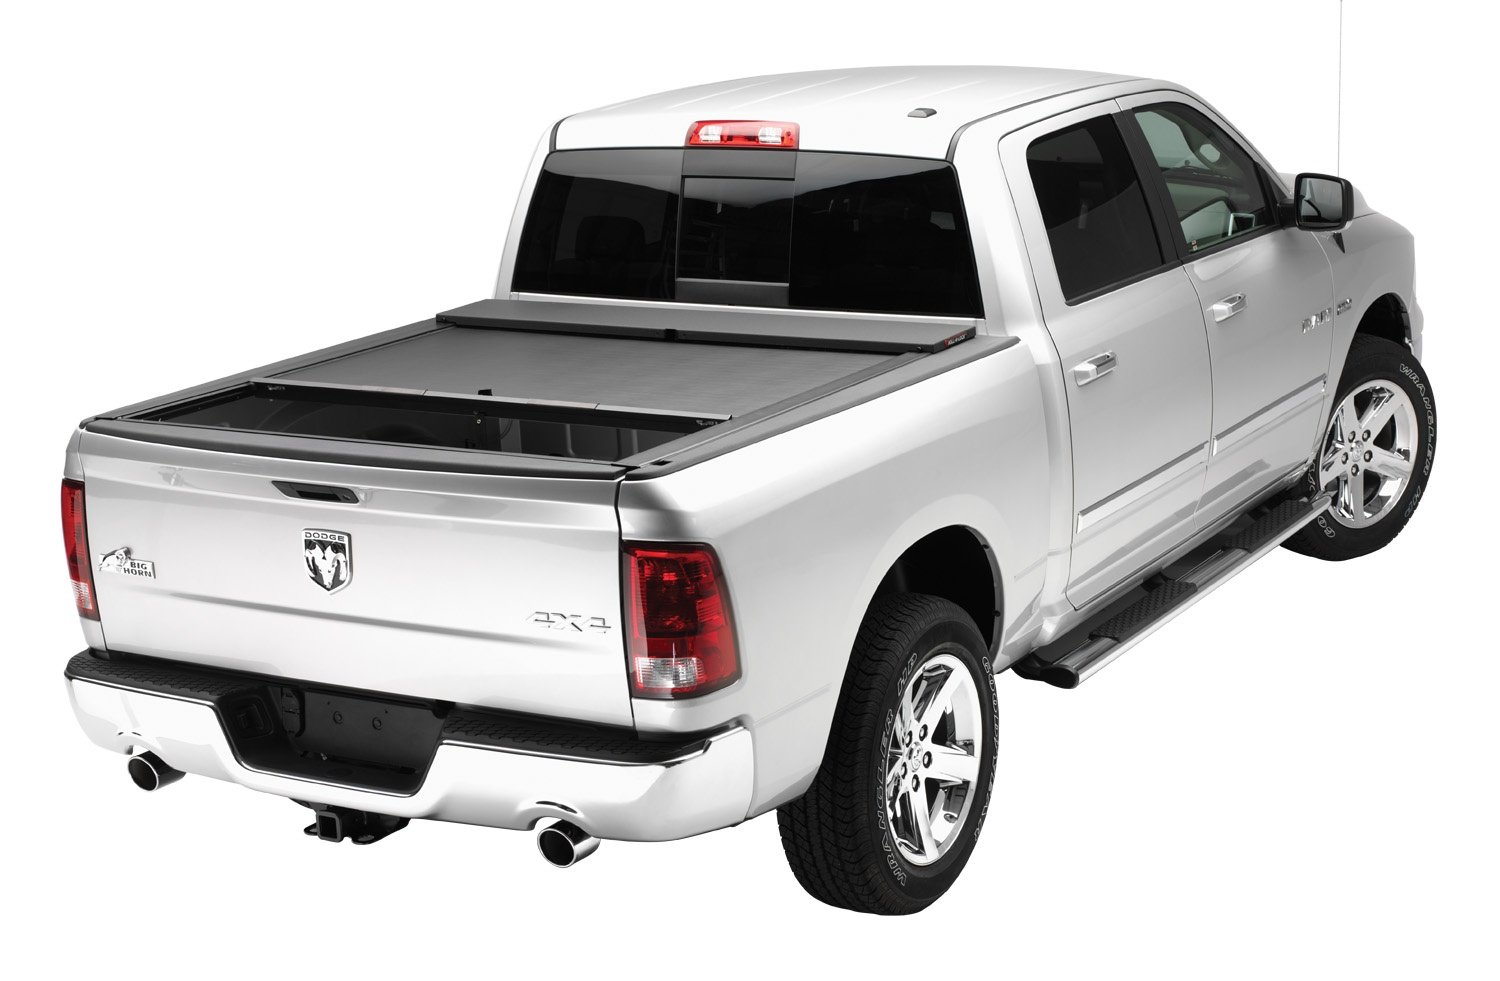 LG447M M-Series Locking Retractable Truck Bed Cover for Select Ram 1500 Classic, 2009-2018 Dodge Ram 1500) [5.6 ft. Bed]